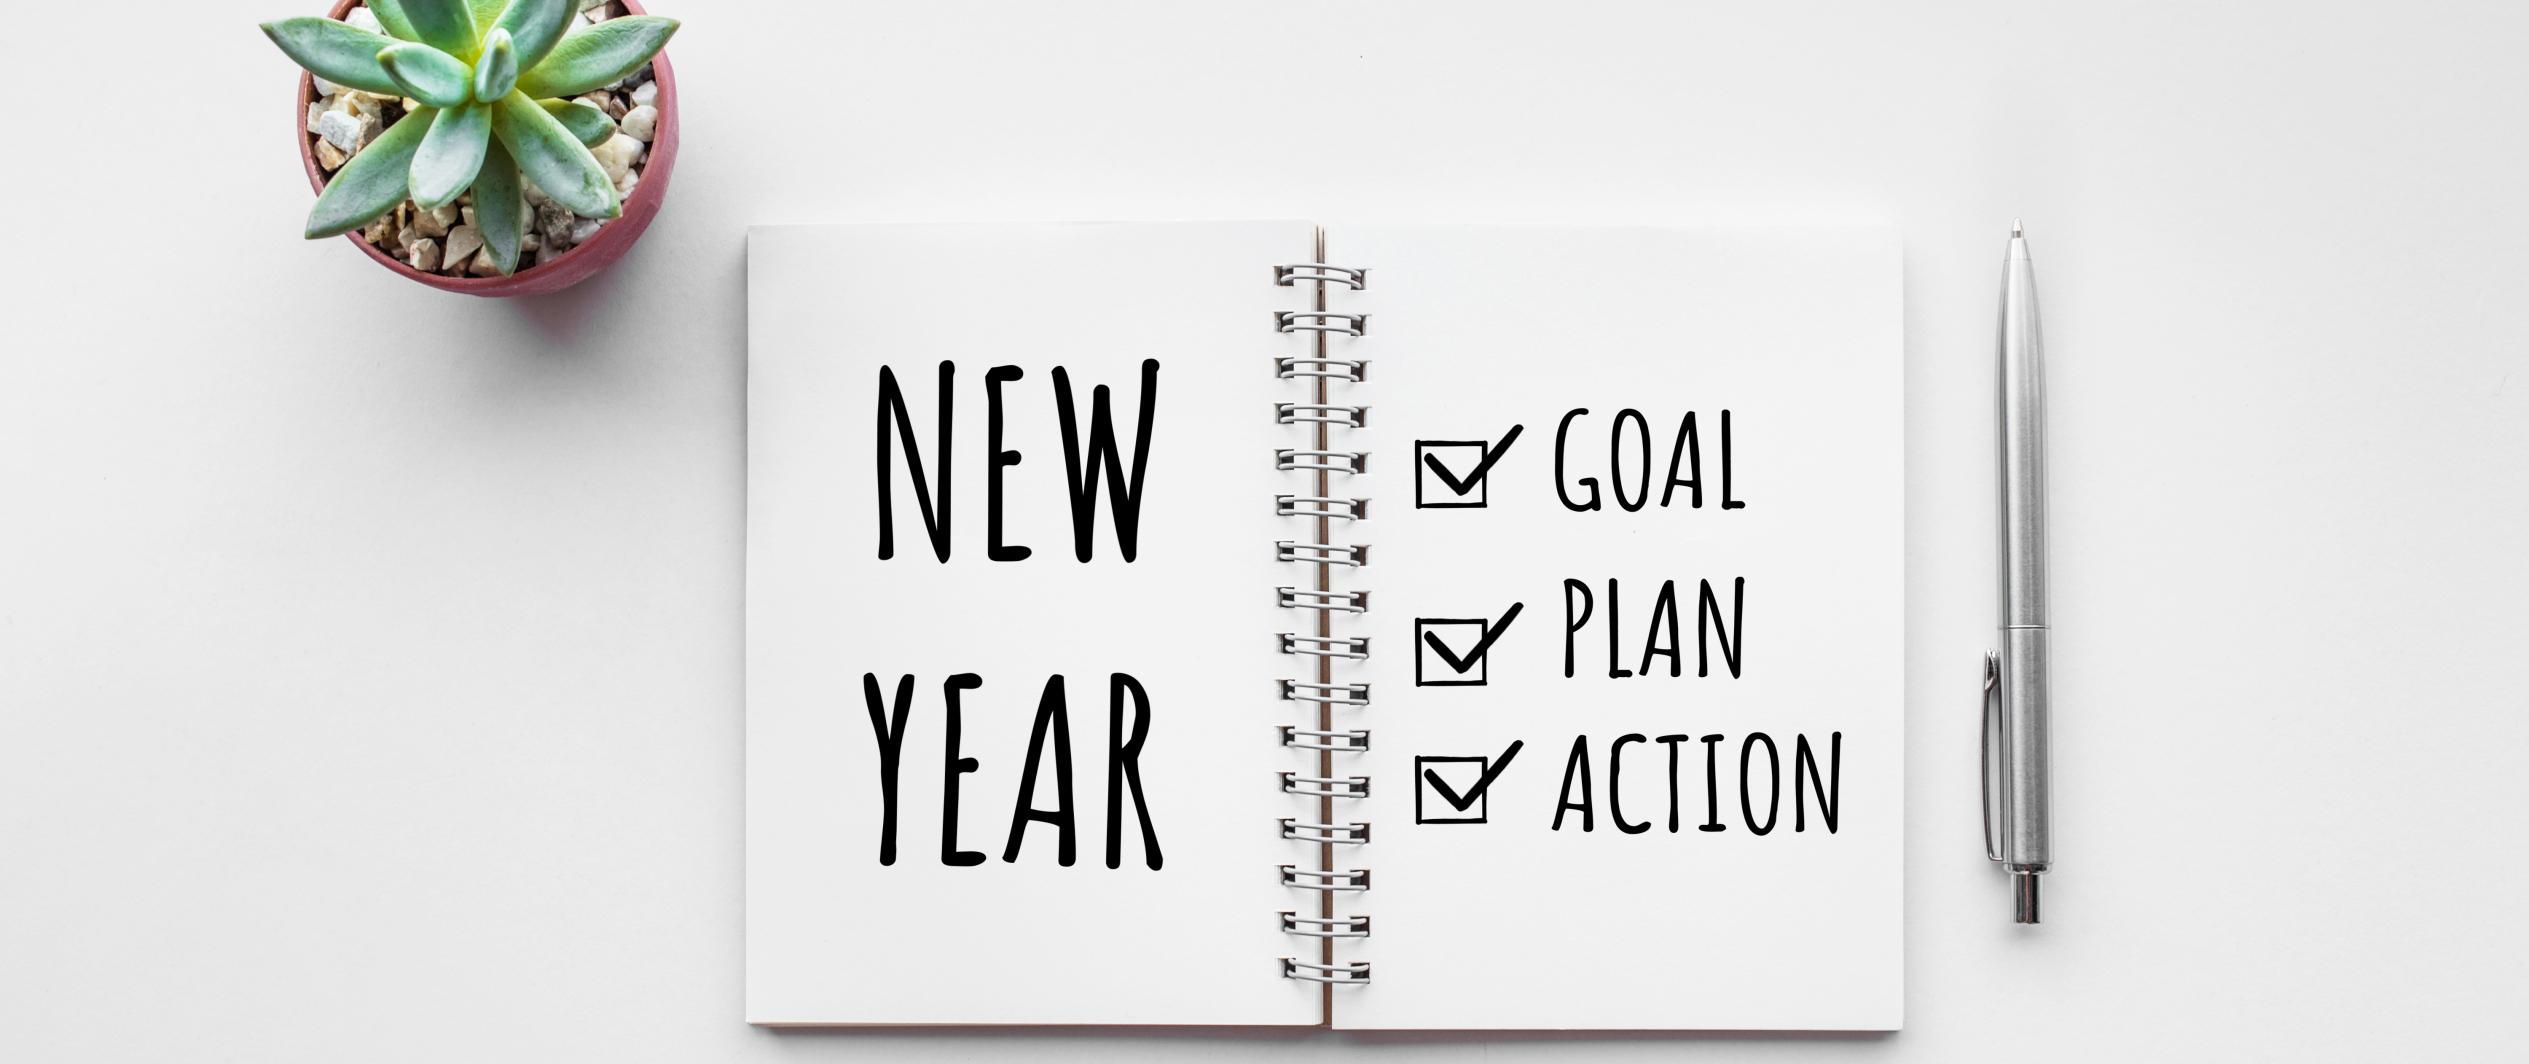 How to follow through with your resolutions